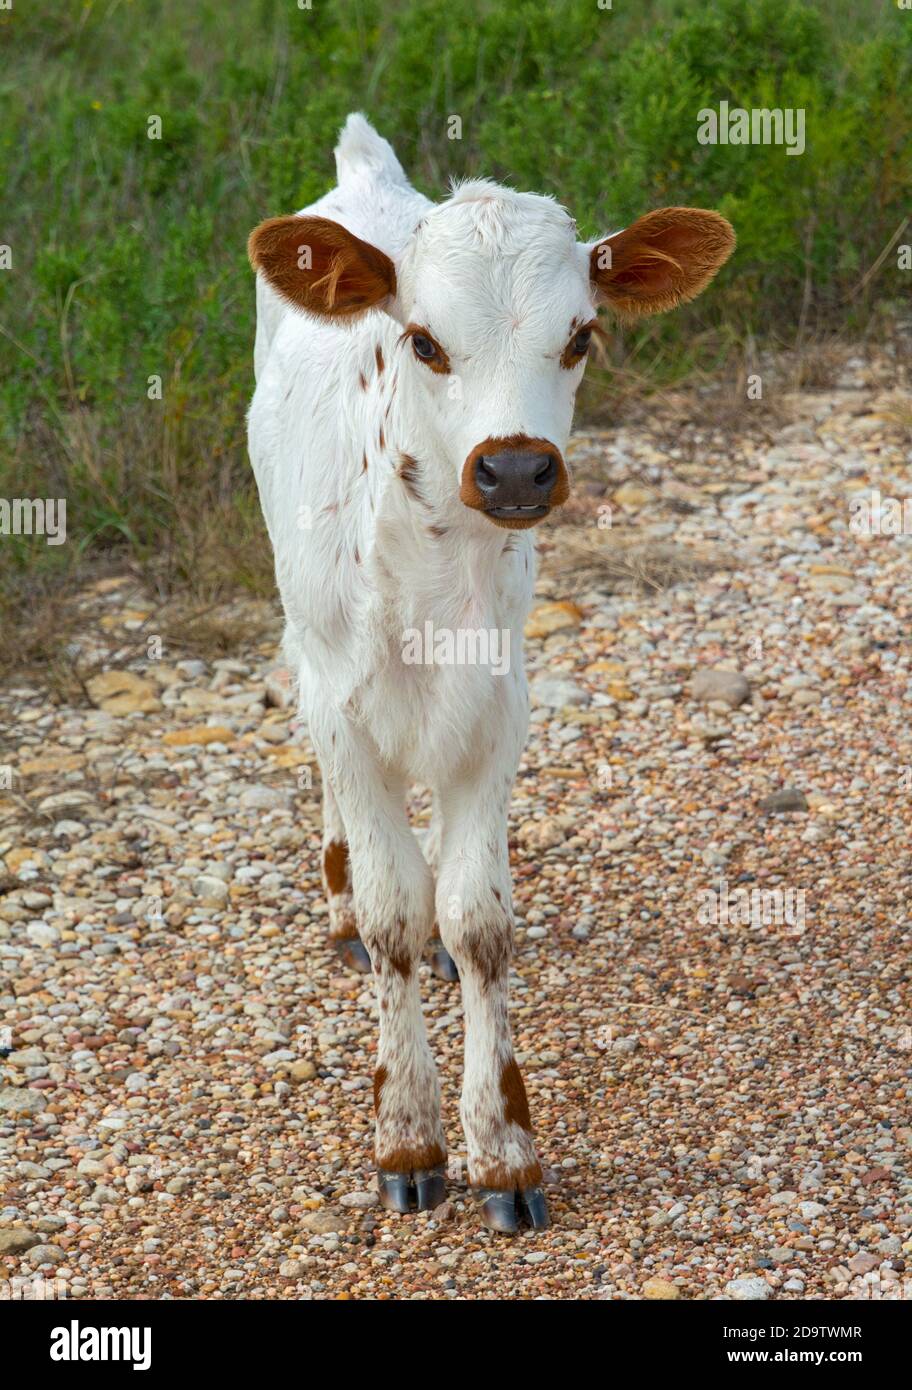 Texas Forts Trail, Shackelford County, Albany, Fort Griffin State Historic Site, longhorn cattle, calf Stock Photo